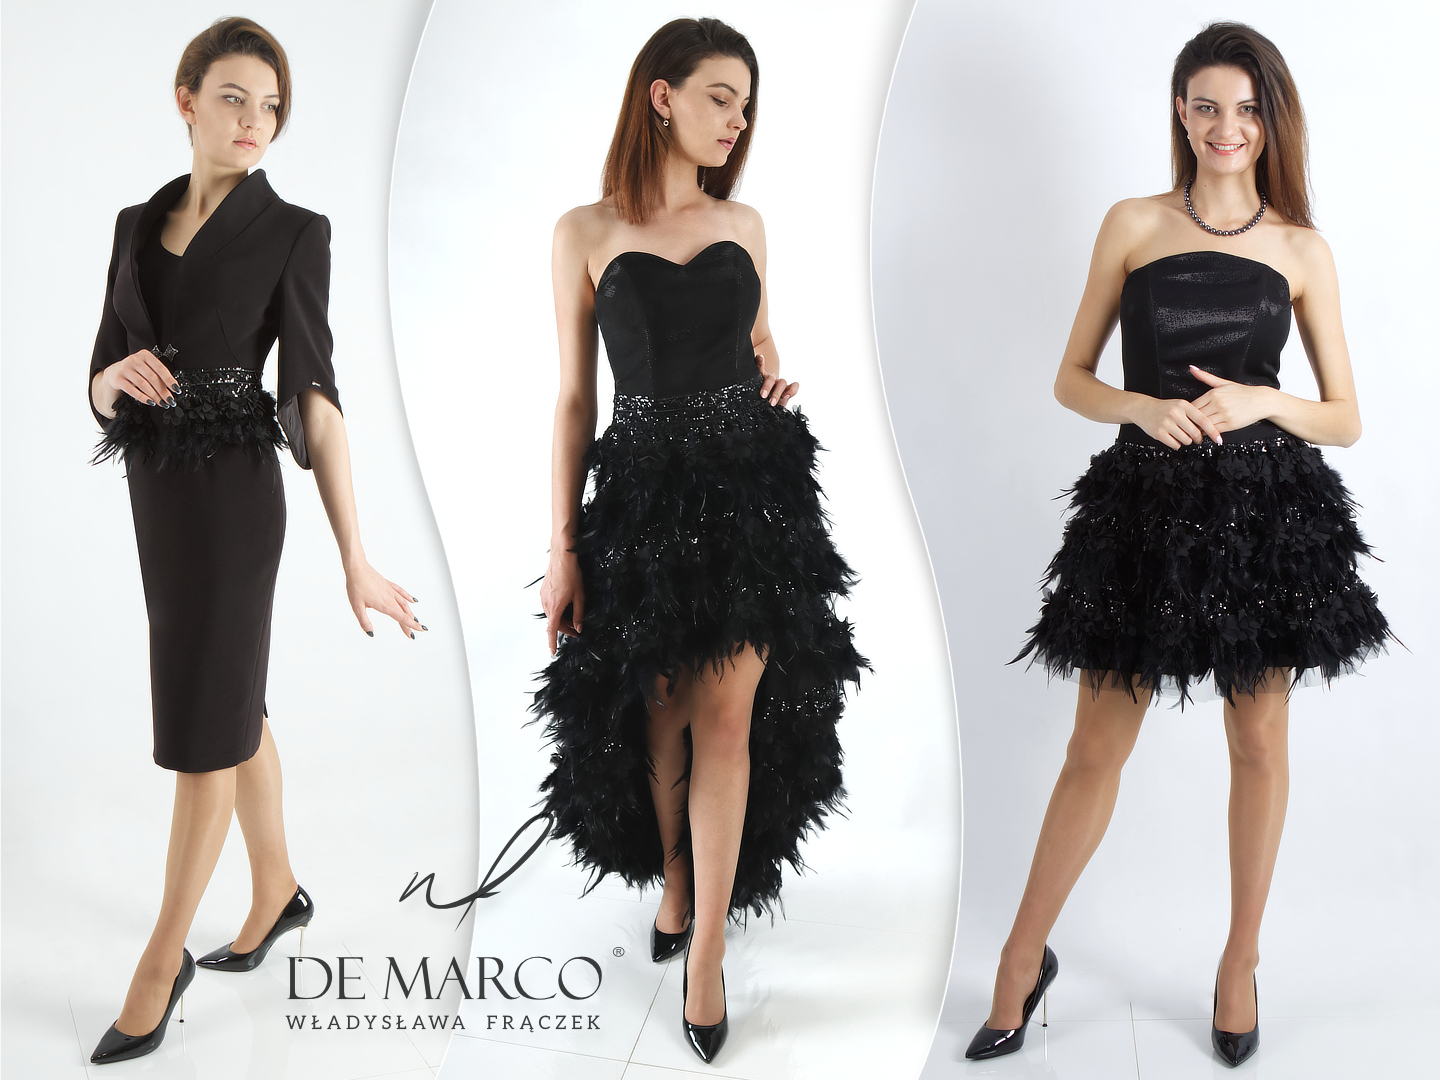 De Marco’s exclusive feather evening gowns